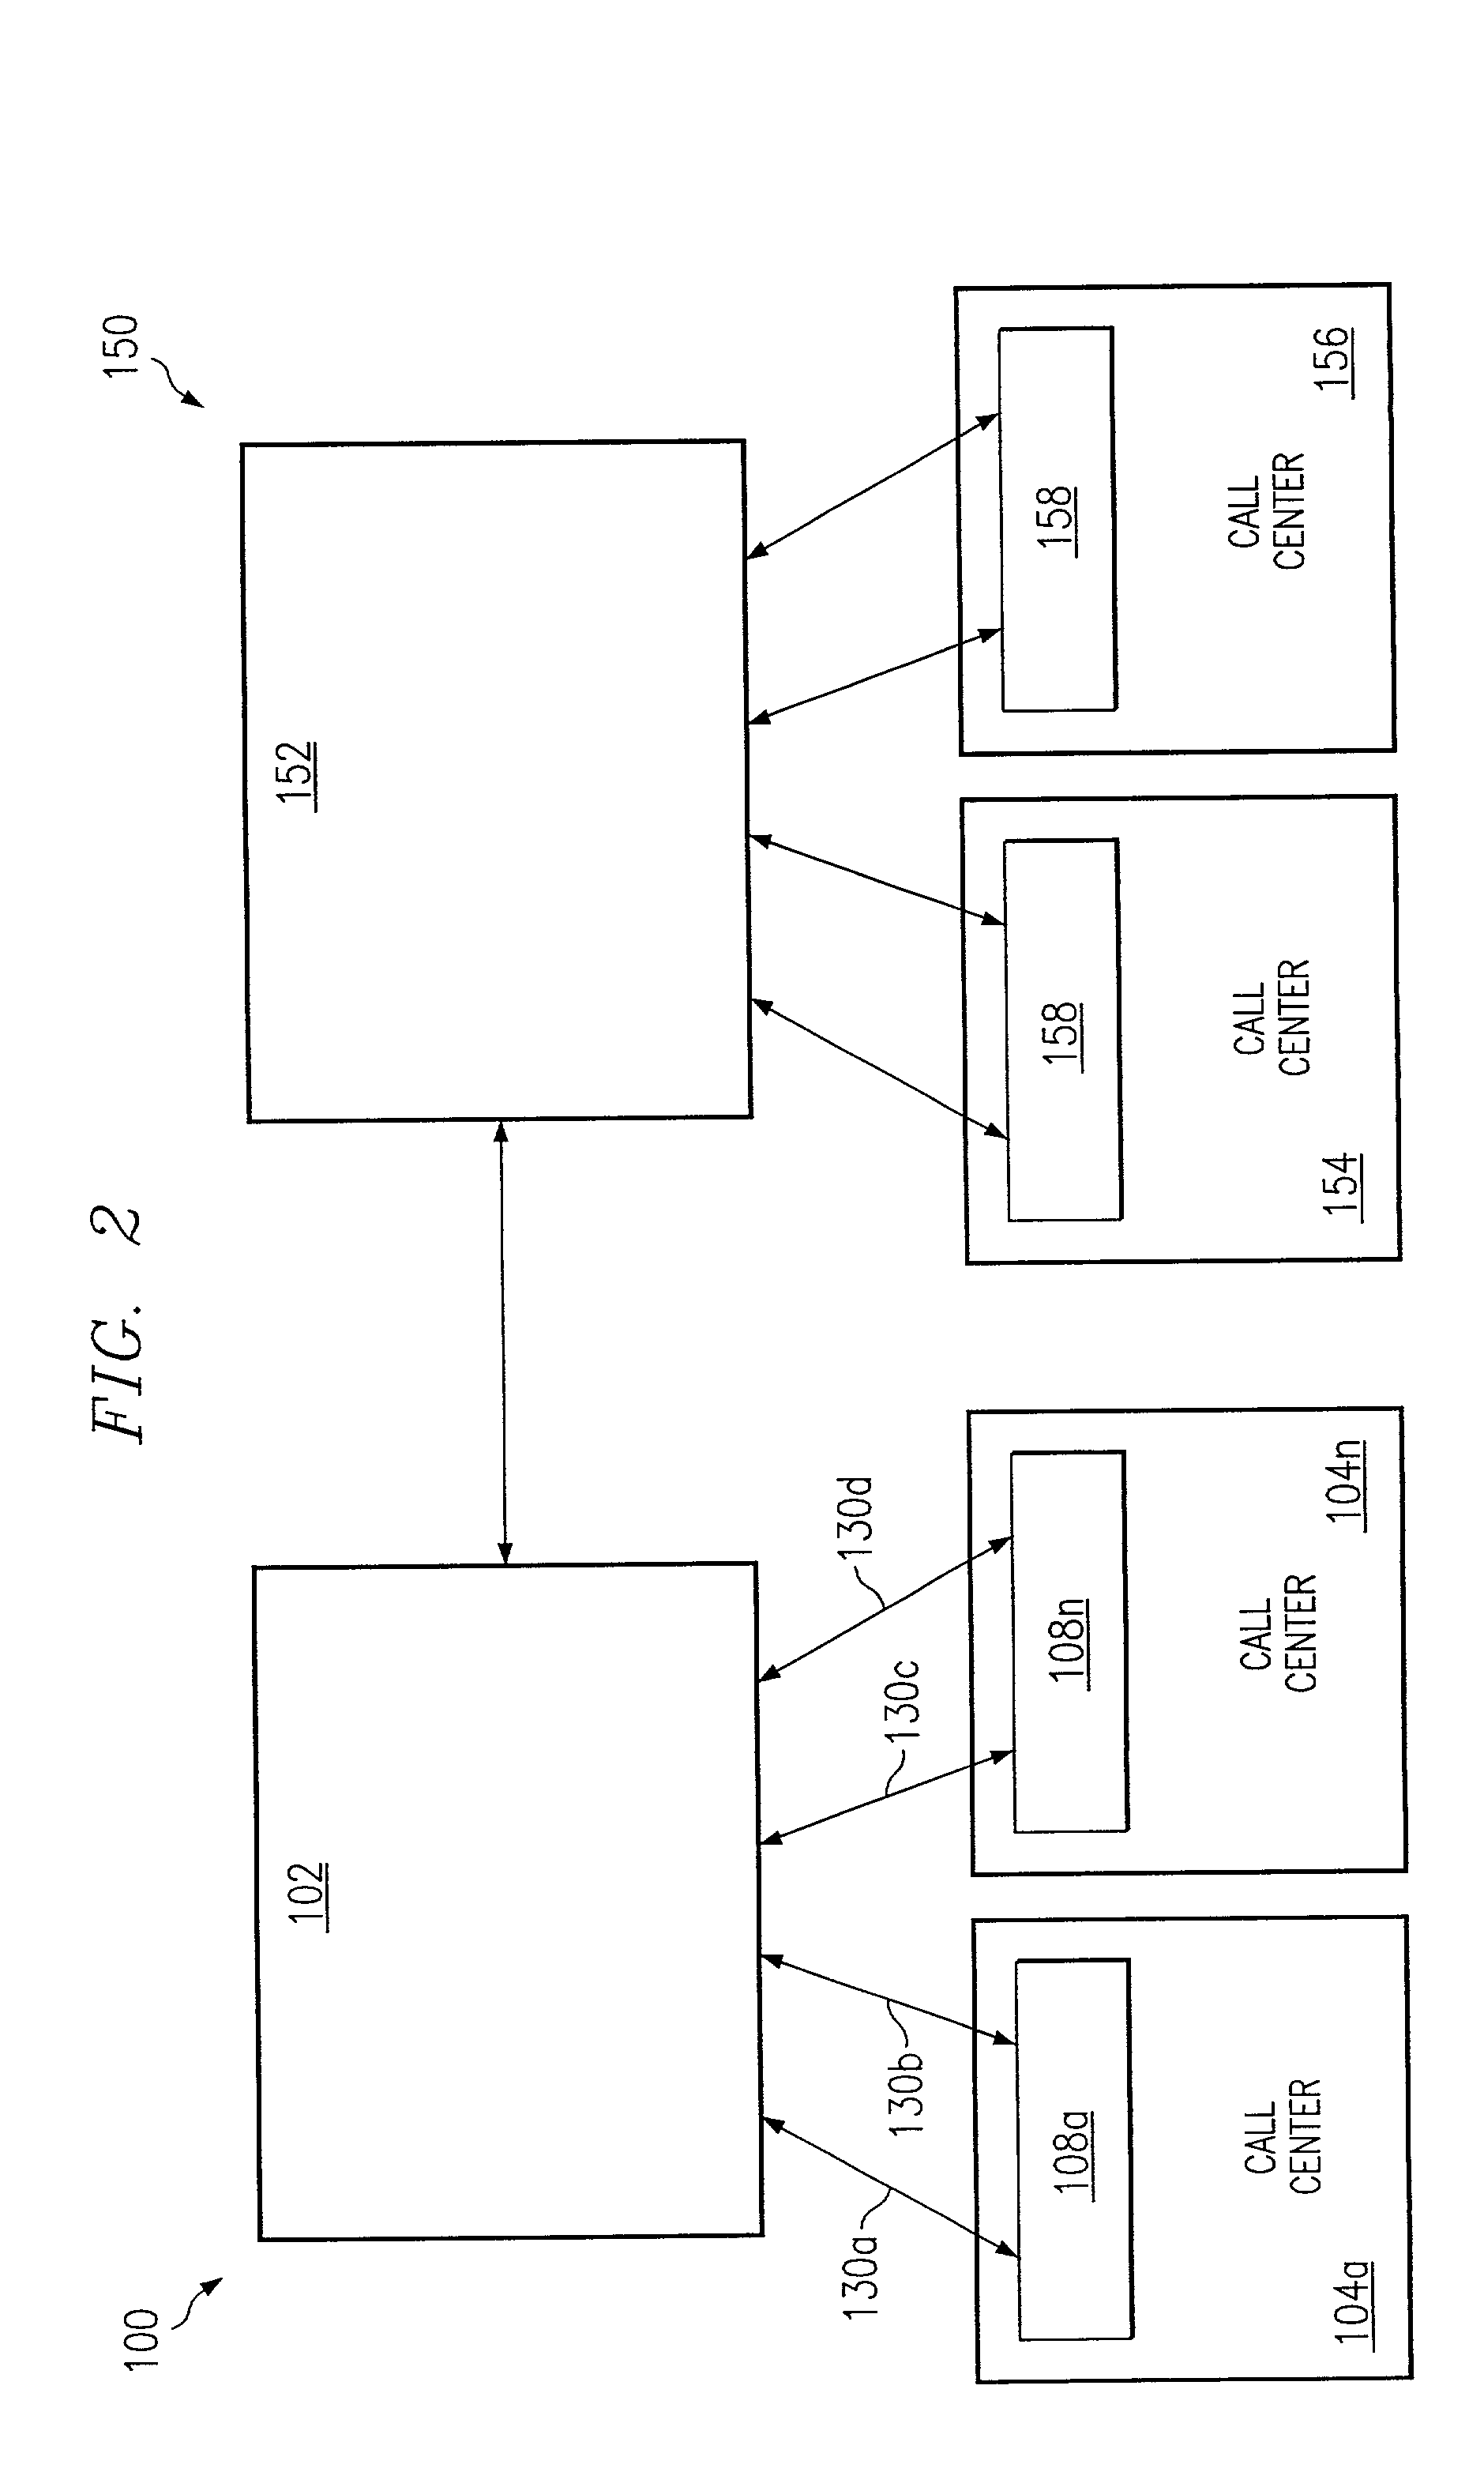 Method and system for distributing outbound telephone calls